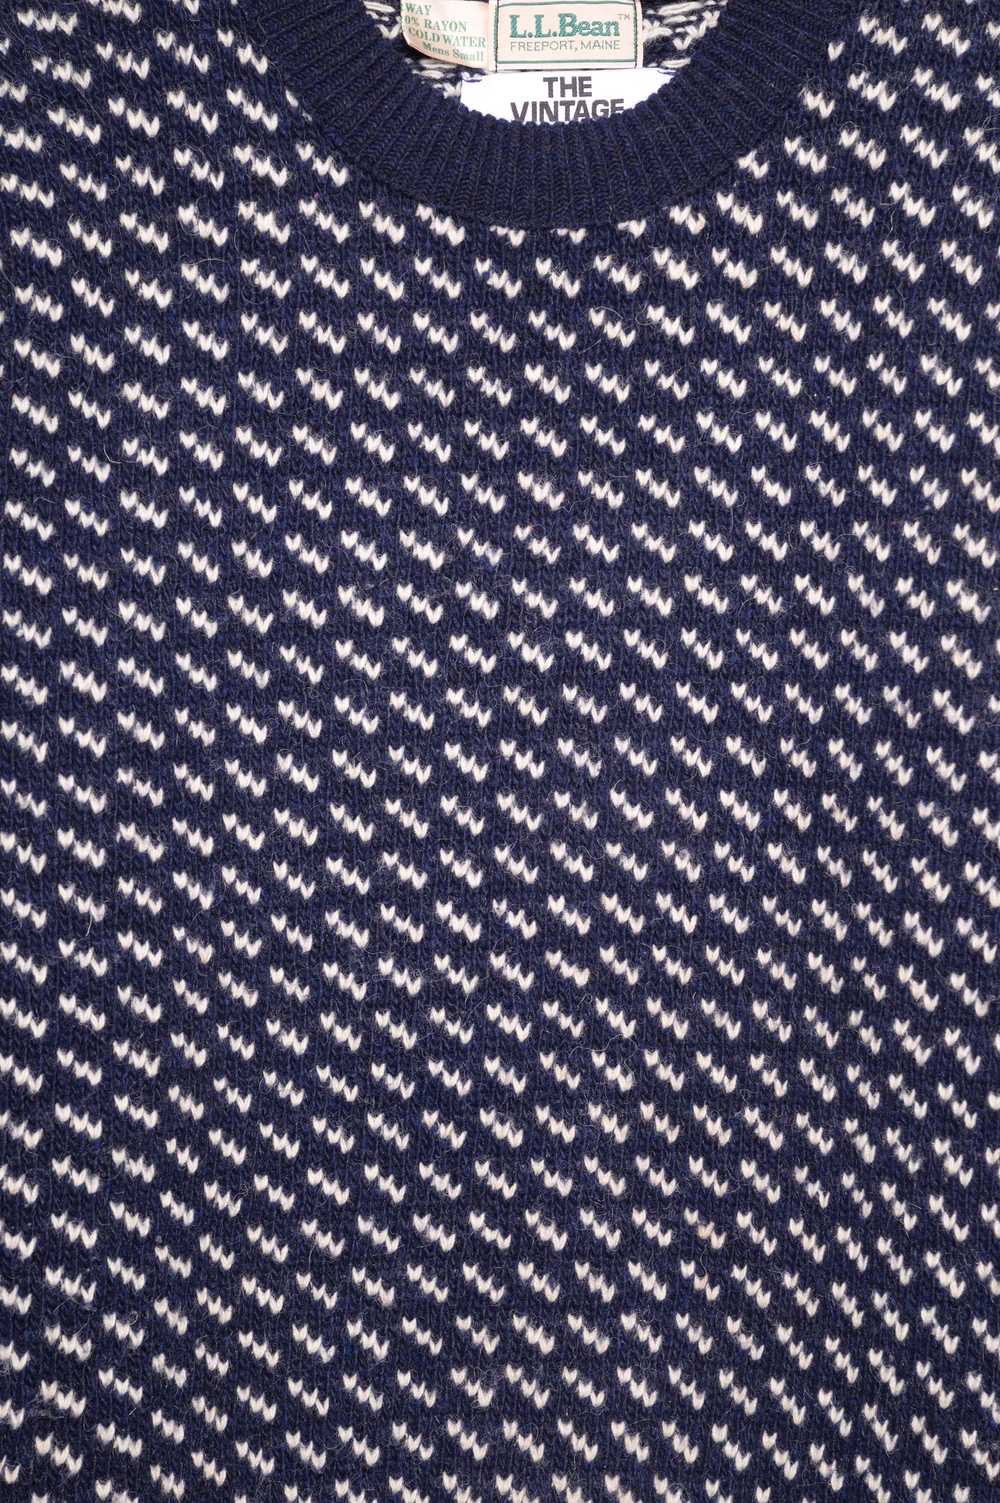 Navy Dotted Wool Sweater - image 2